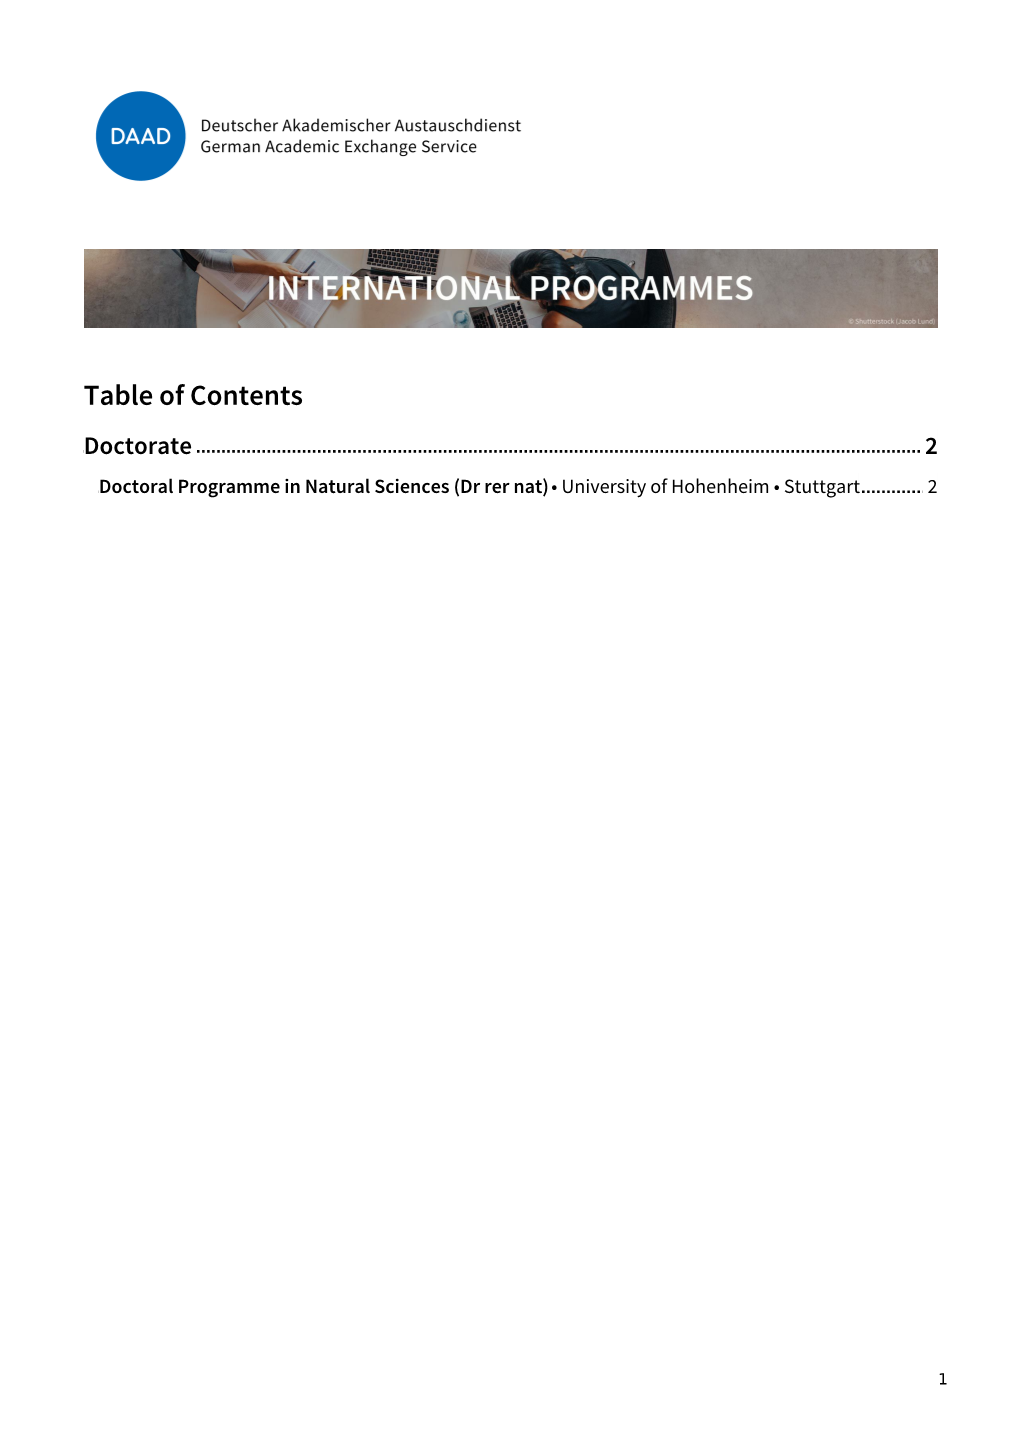 Table of Contents Doctorate 2 Doctoral Programme in Natural Sciences (Dr Rer Nat) • University of Hohenheim • Stuttgart 2